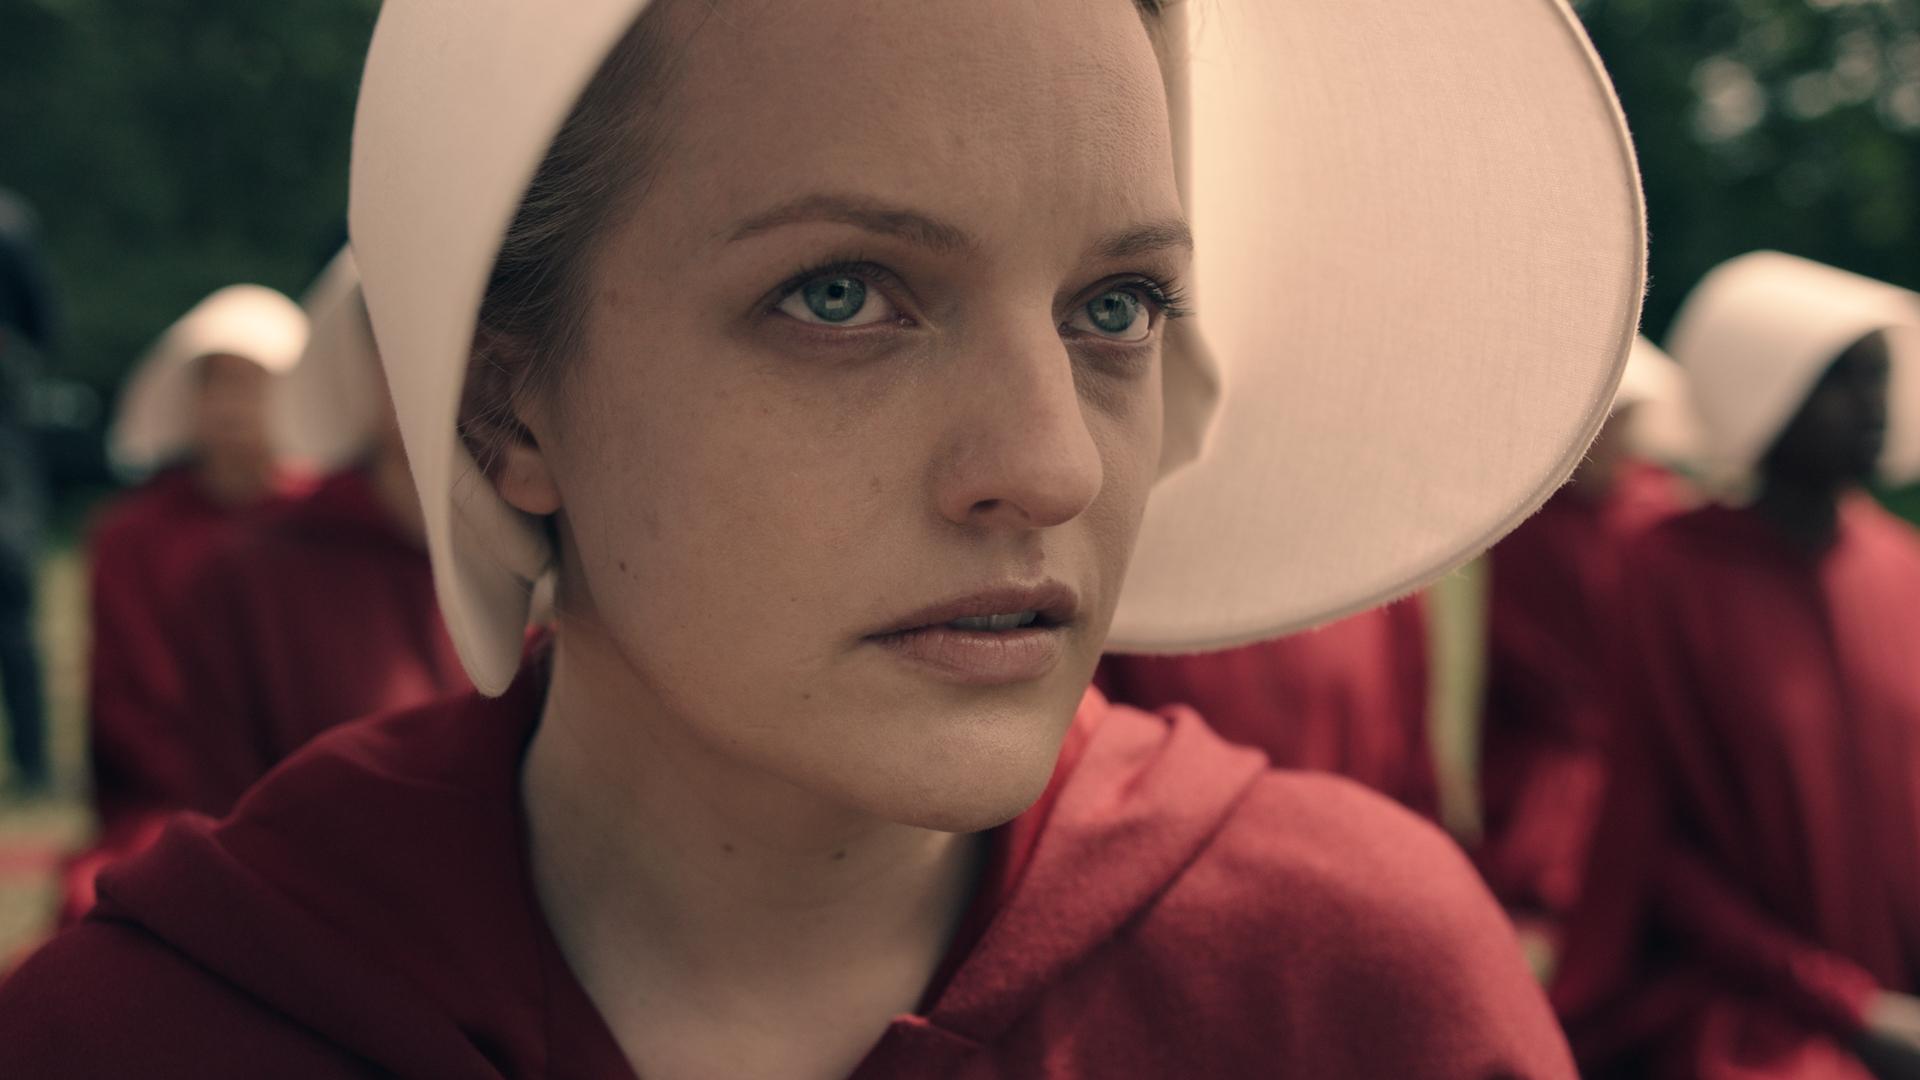 Elizabeth Moss' Offred looks at something off camera in The Handmaid's Tale